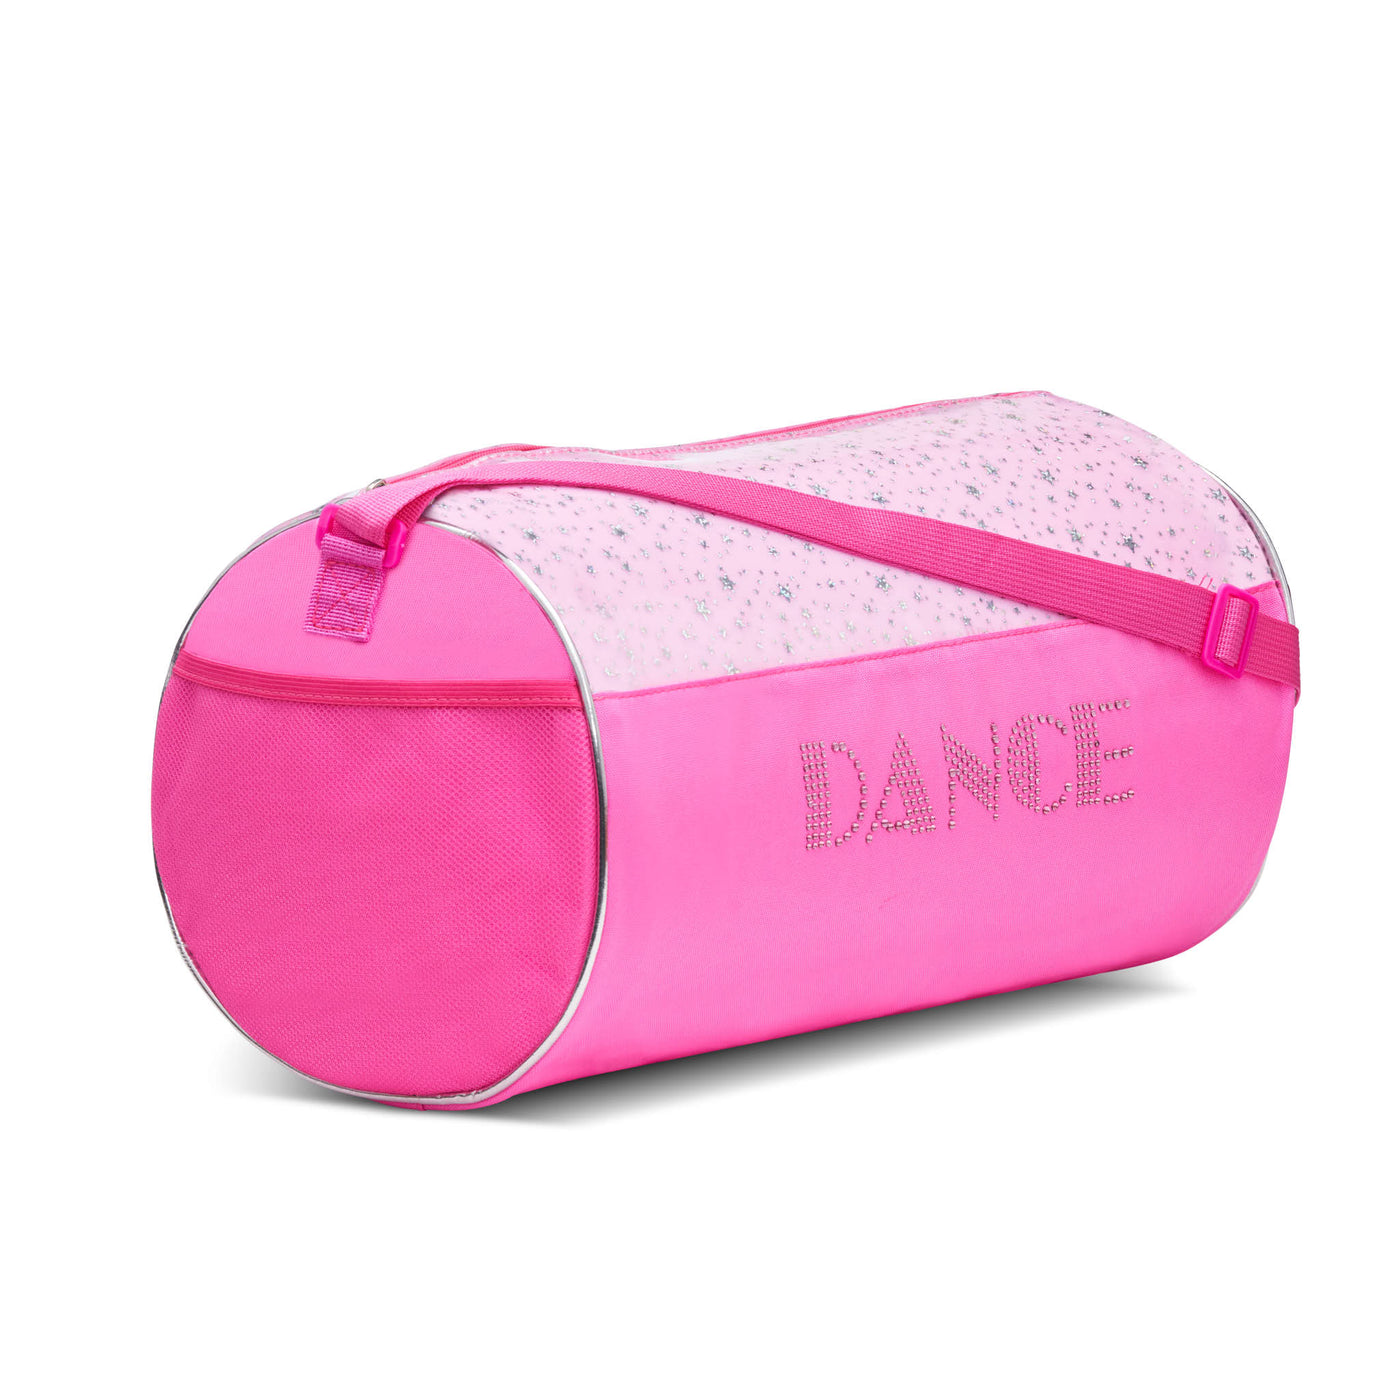 Dance Duffel Bag Pink and Clear with Silver Stars